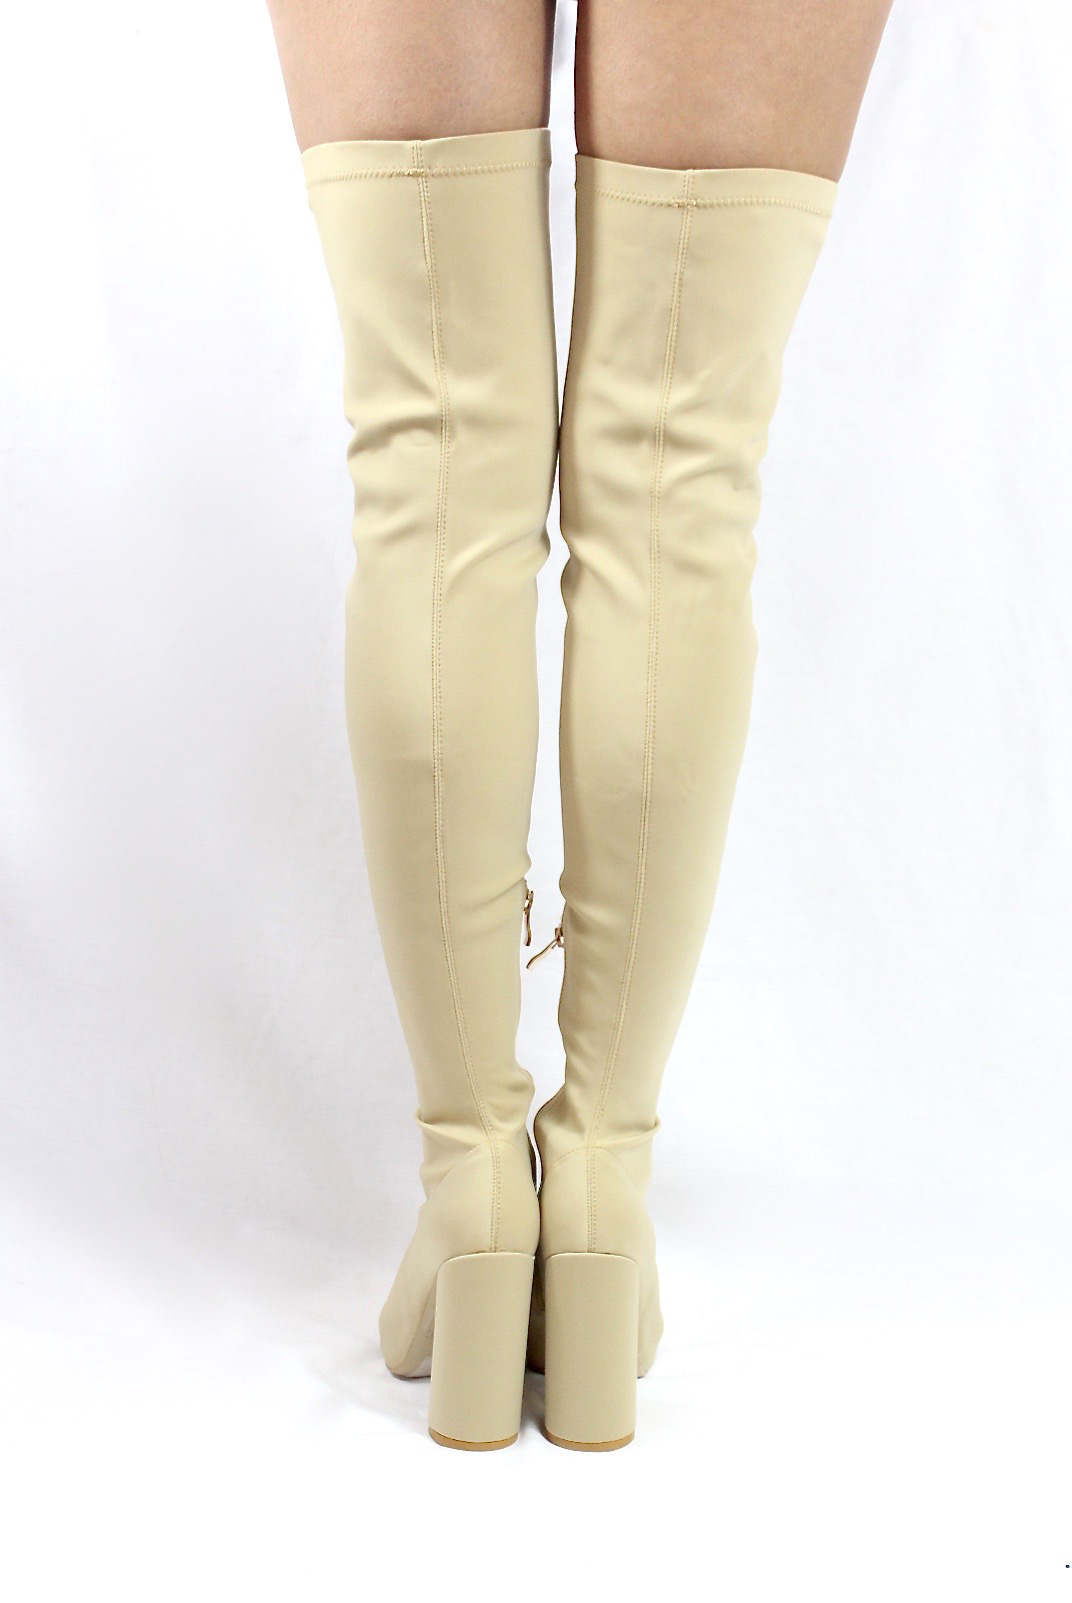 Camy-9 Beige Lycra Chunky Heel Thigh High Open Toe Boots-4183